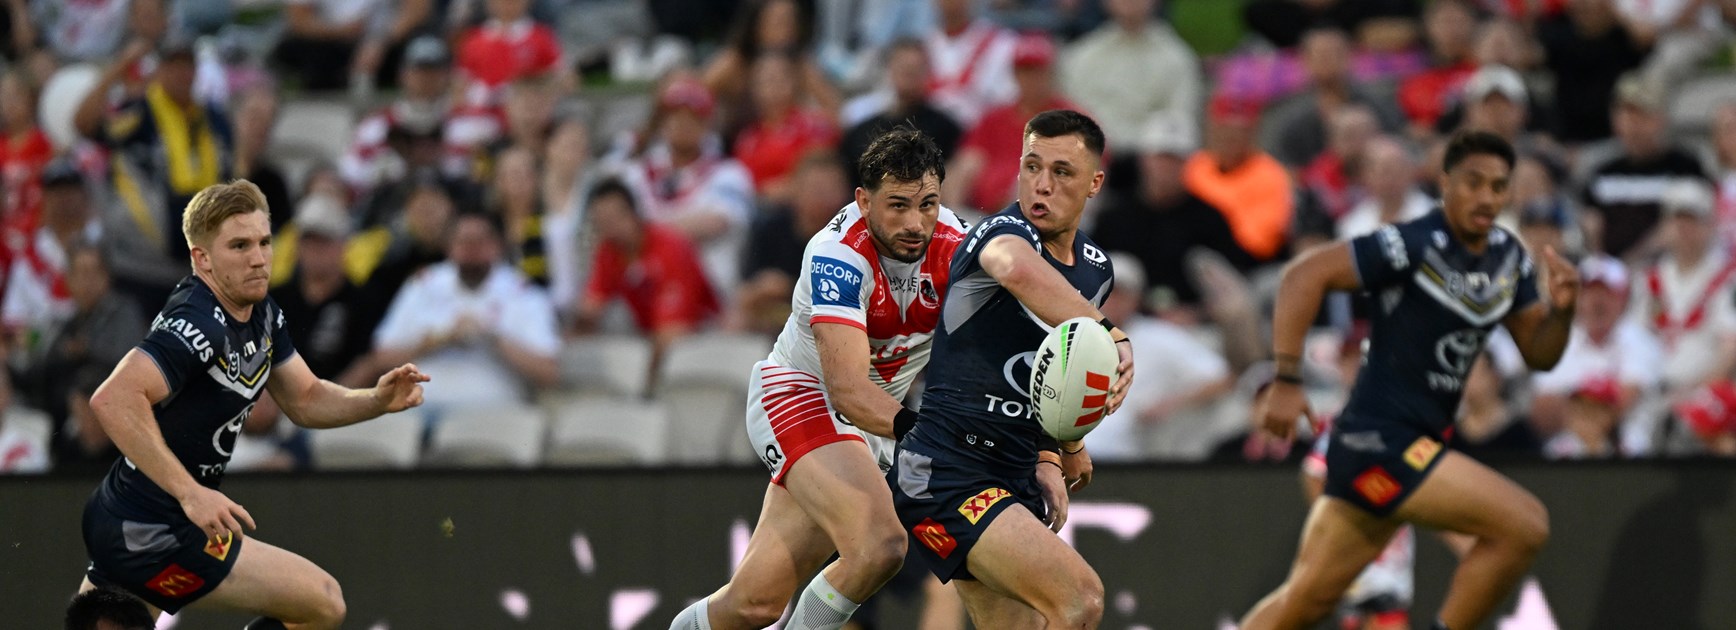 Drinkwater readying for test against injury hit Broncos